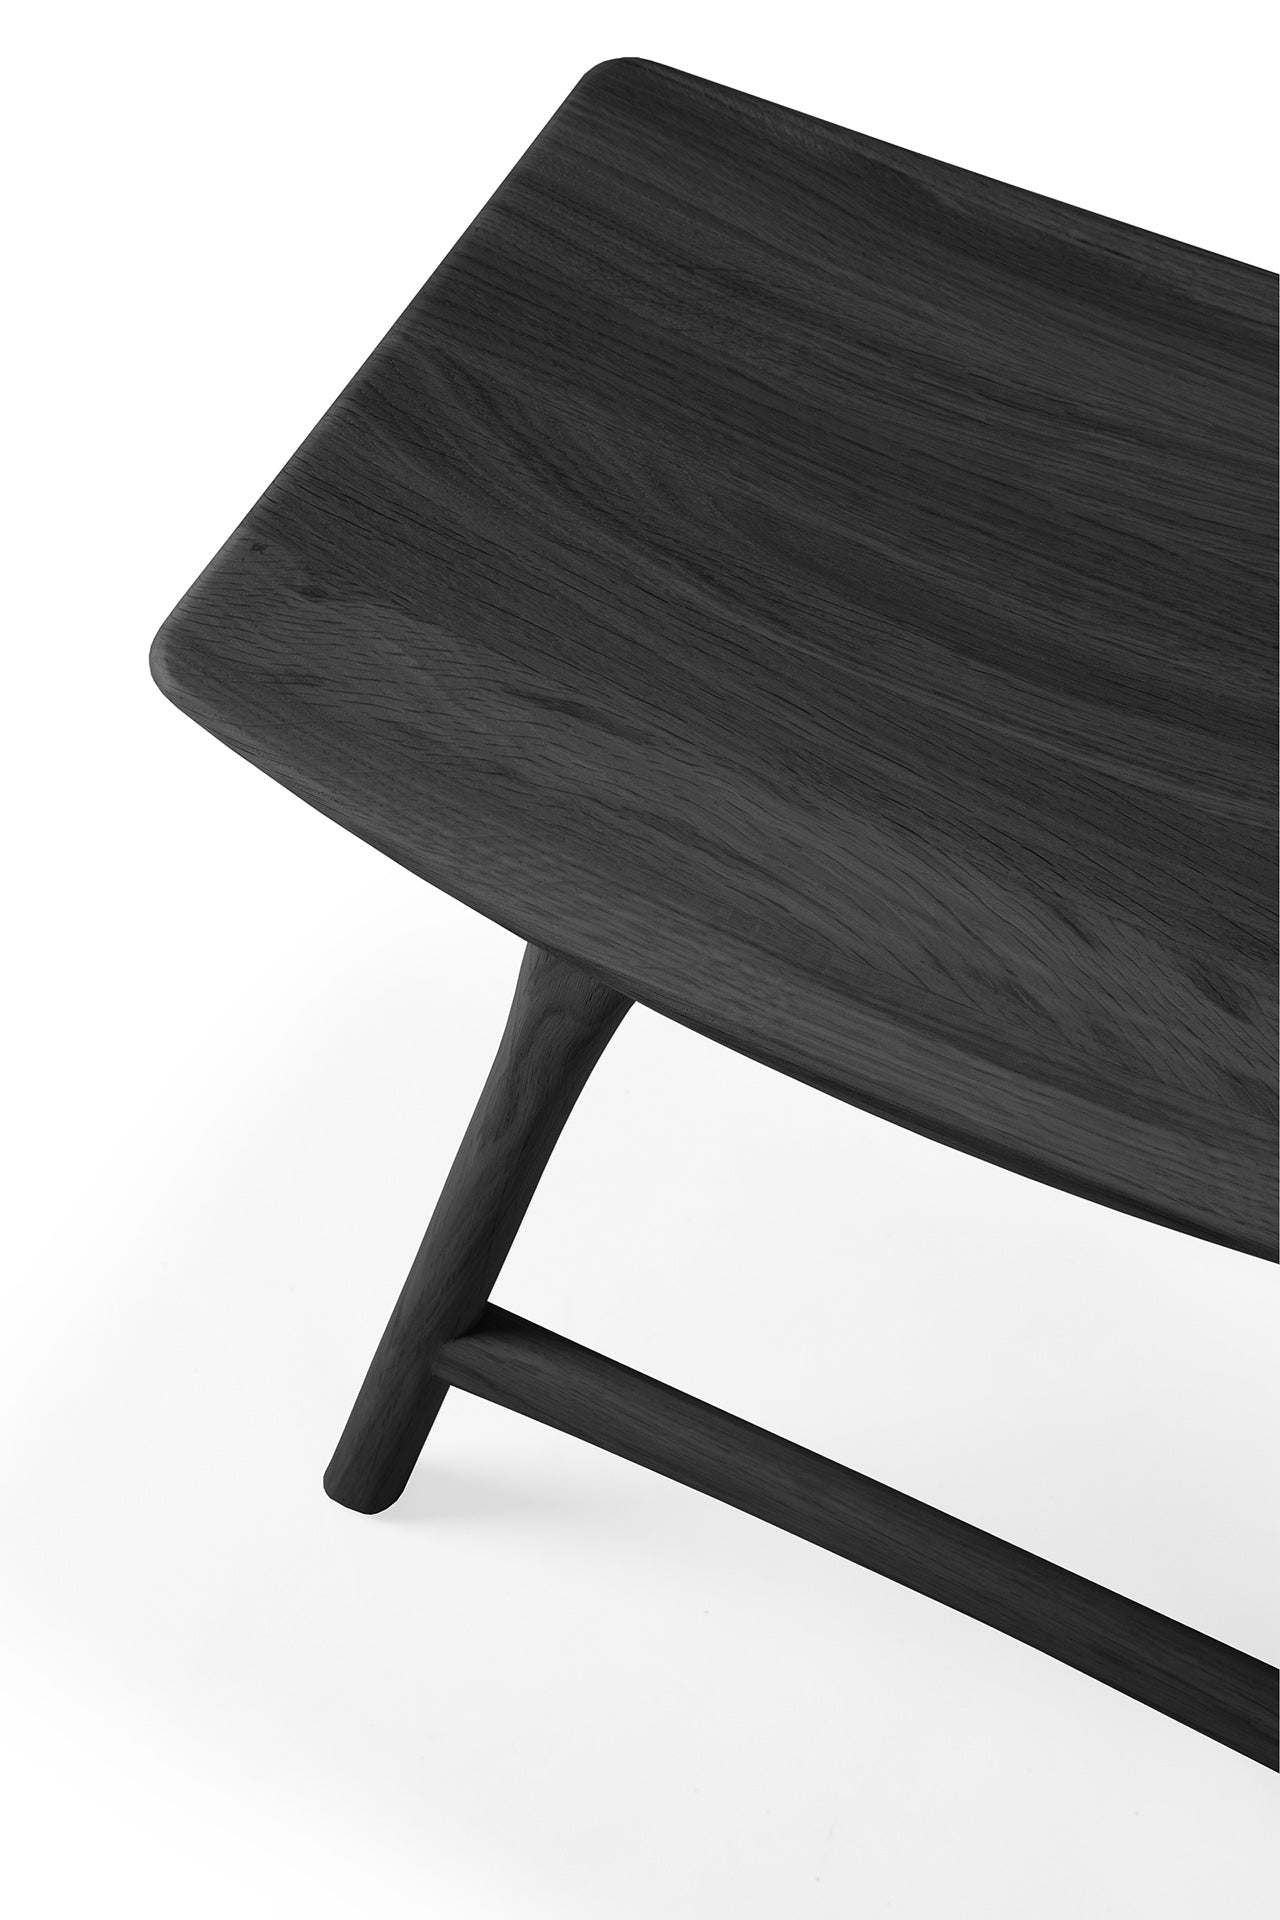 Ethnicraft Oak Osso Low Stool available from Make Your House A Home, Bendigo, Victoria, Australia